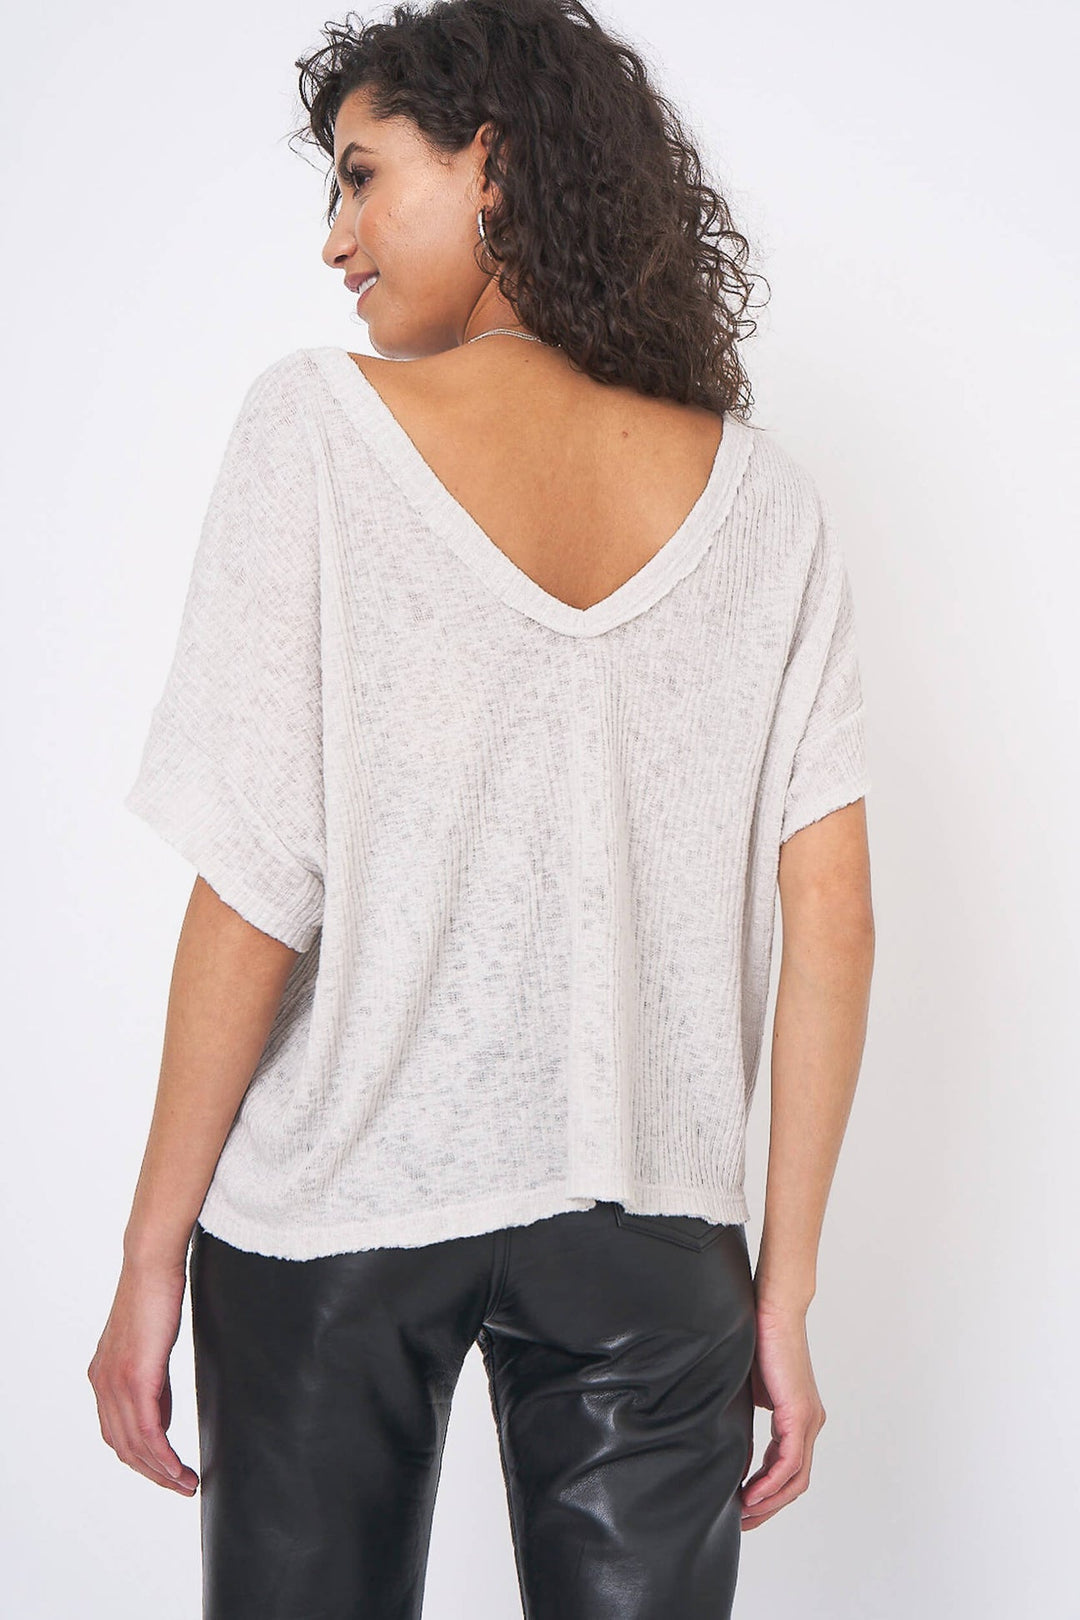 EASY TO LOVE DOUBLE V RIB TEE - Kingfisher Road - Online Boutique